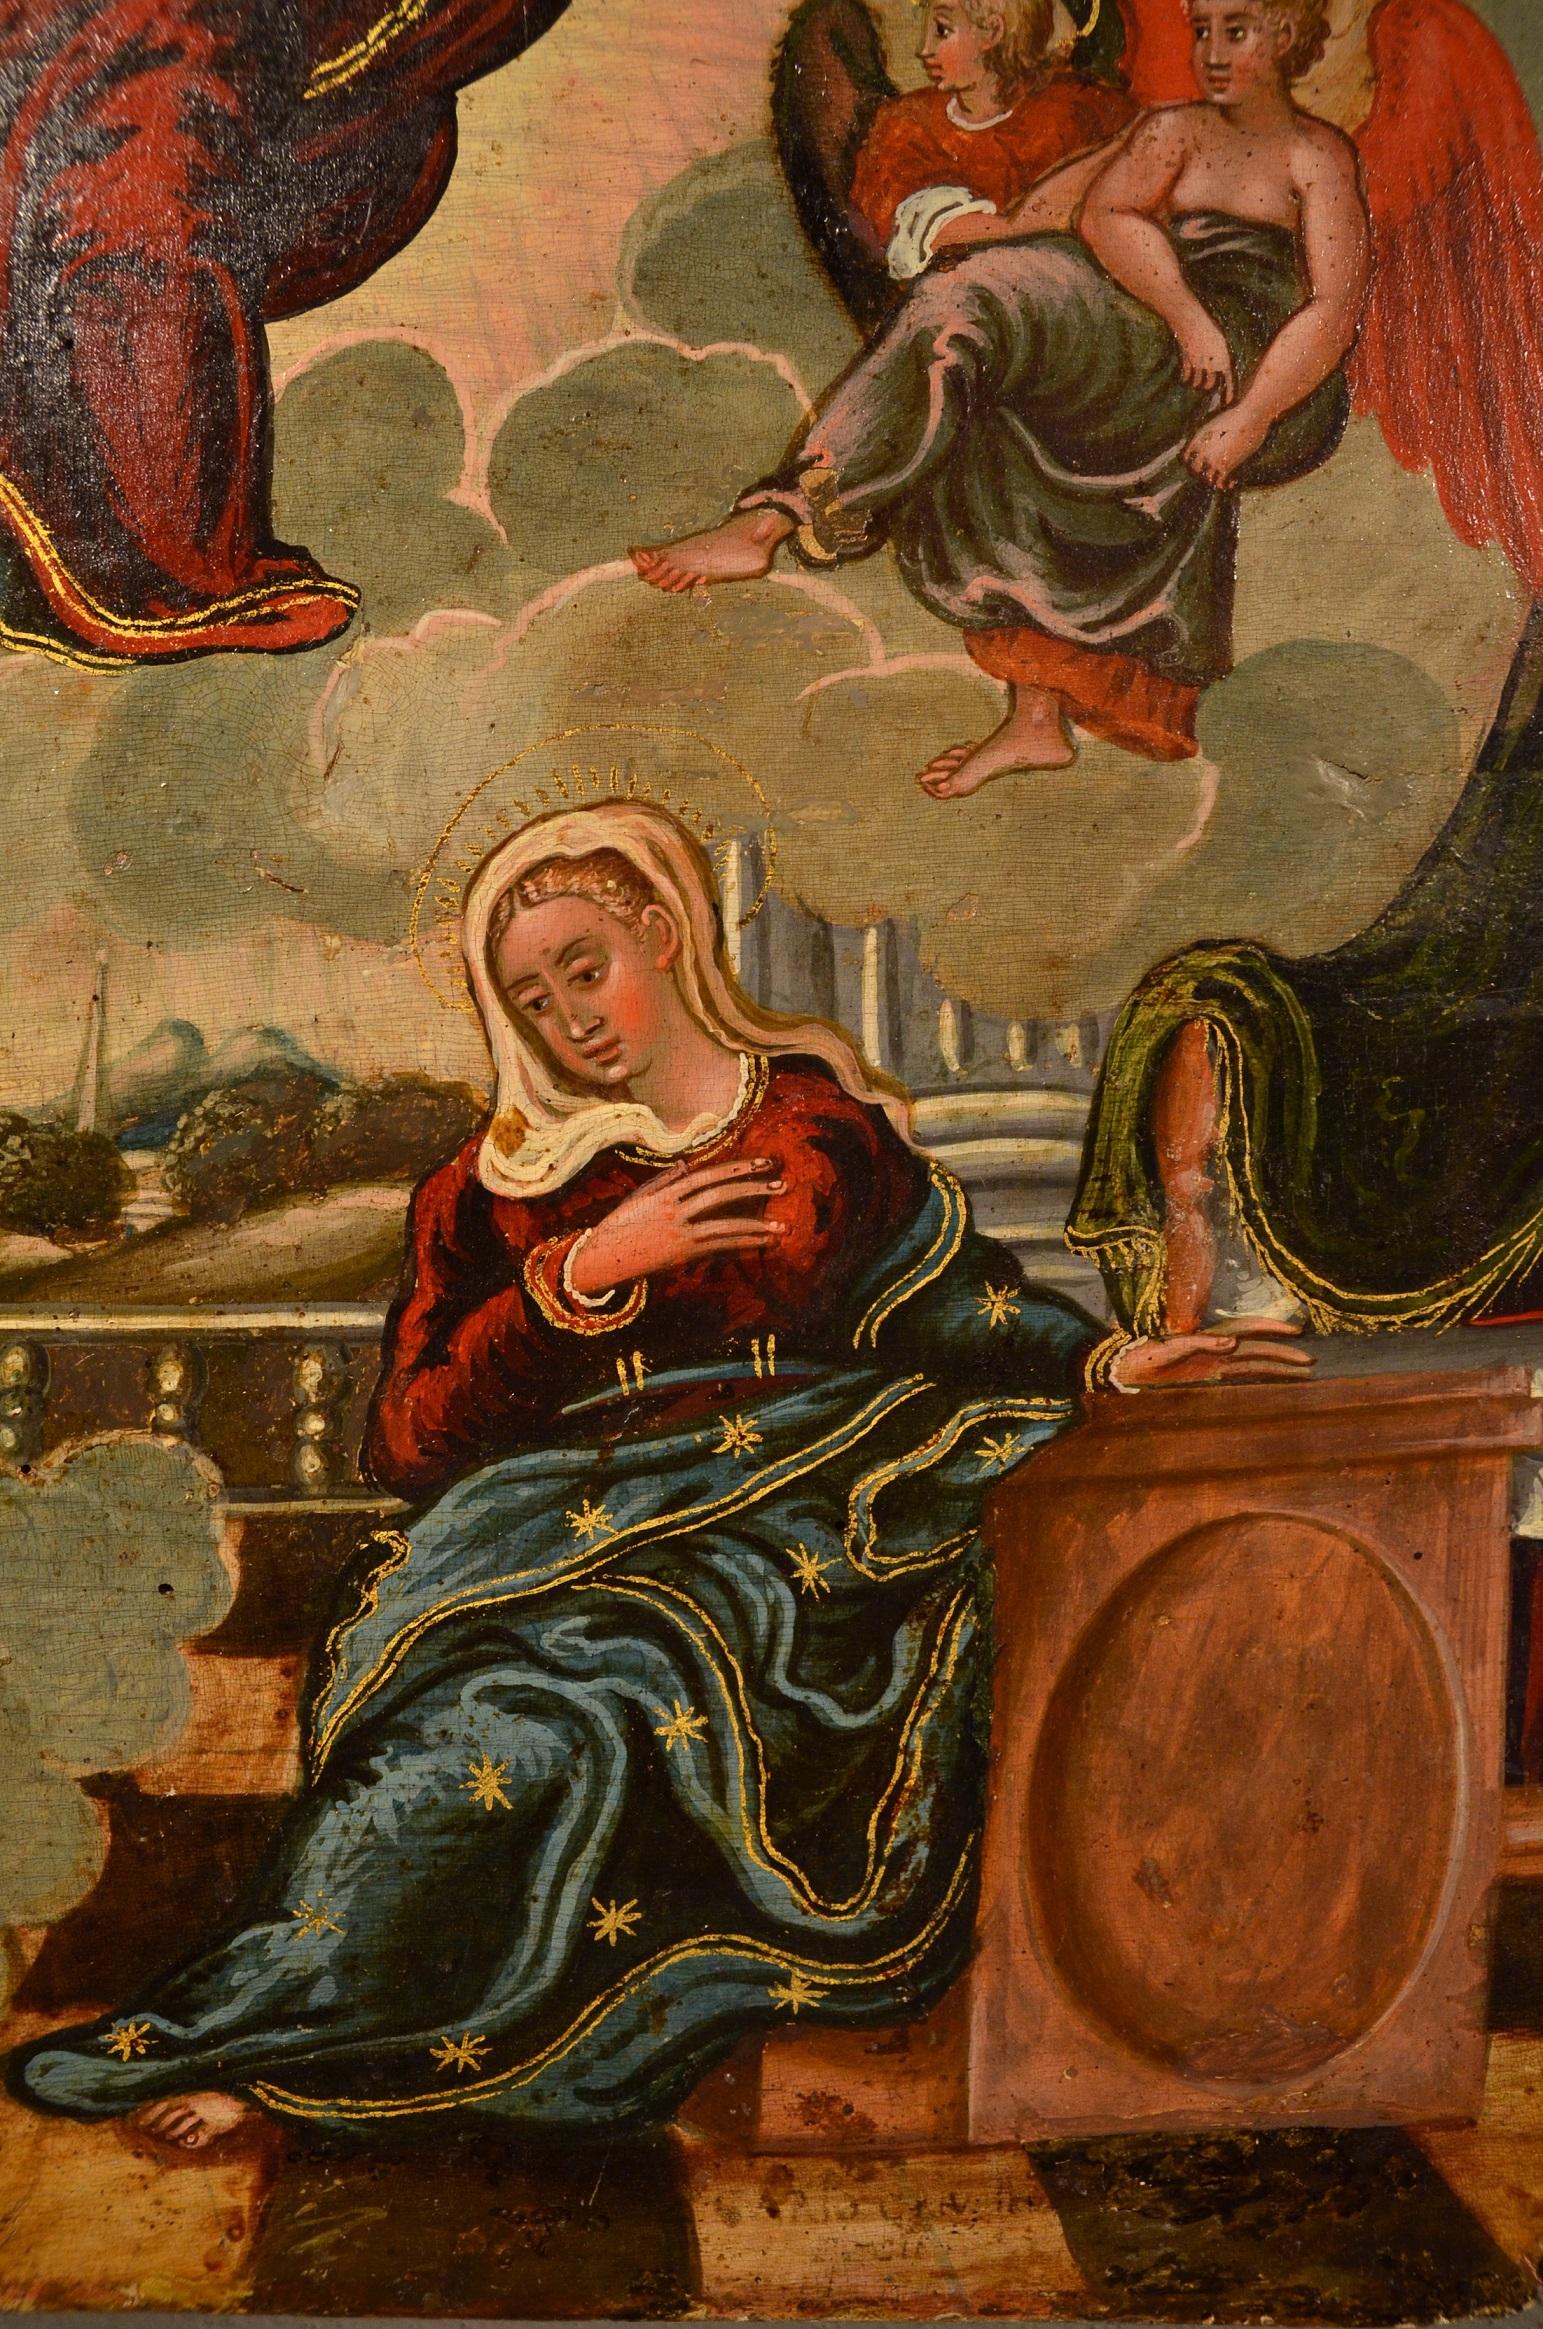 Venetian Old master Paint Tempera on table Italy 16/17th Century Annunciation  - Old Masters Painting by Venetian-Cretan Master, late 16th - early 17th century